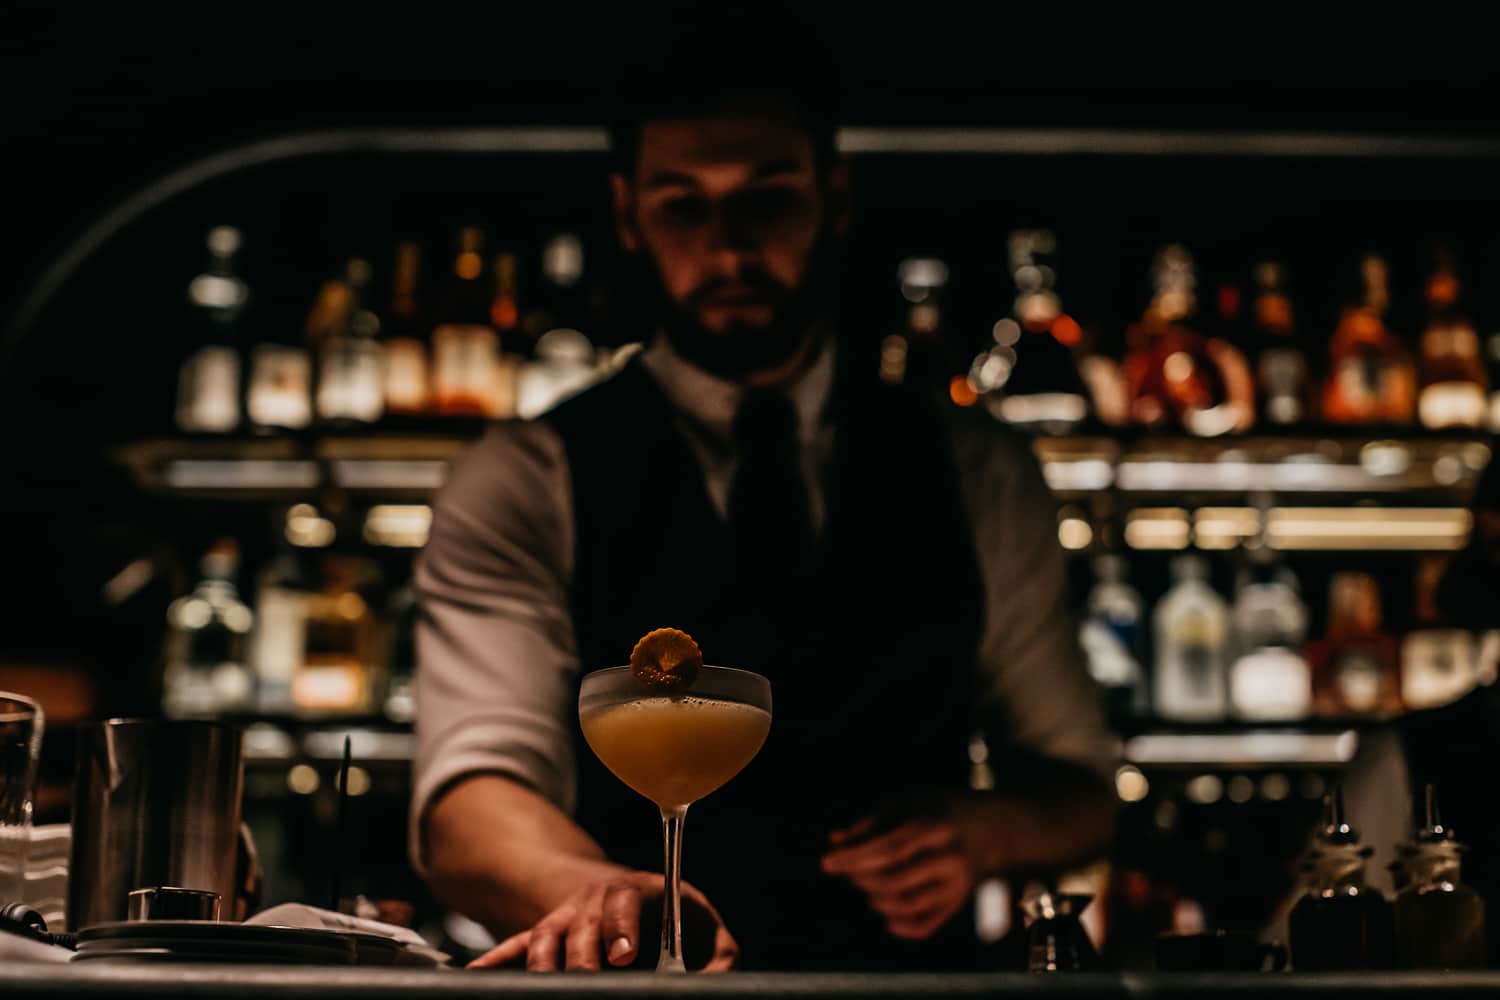 Bartender with cocktail